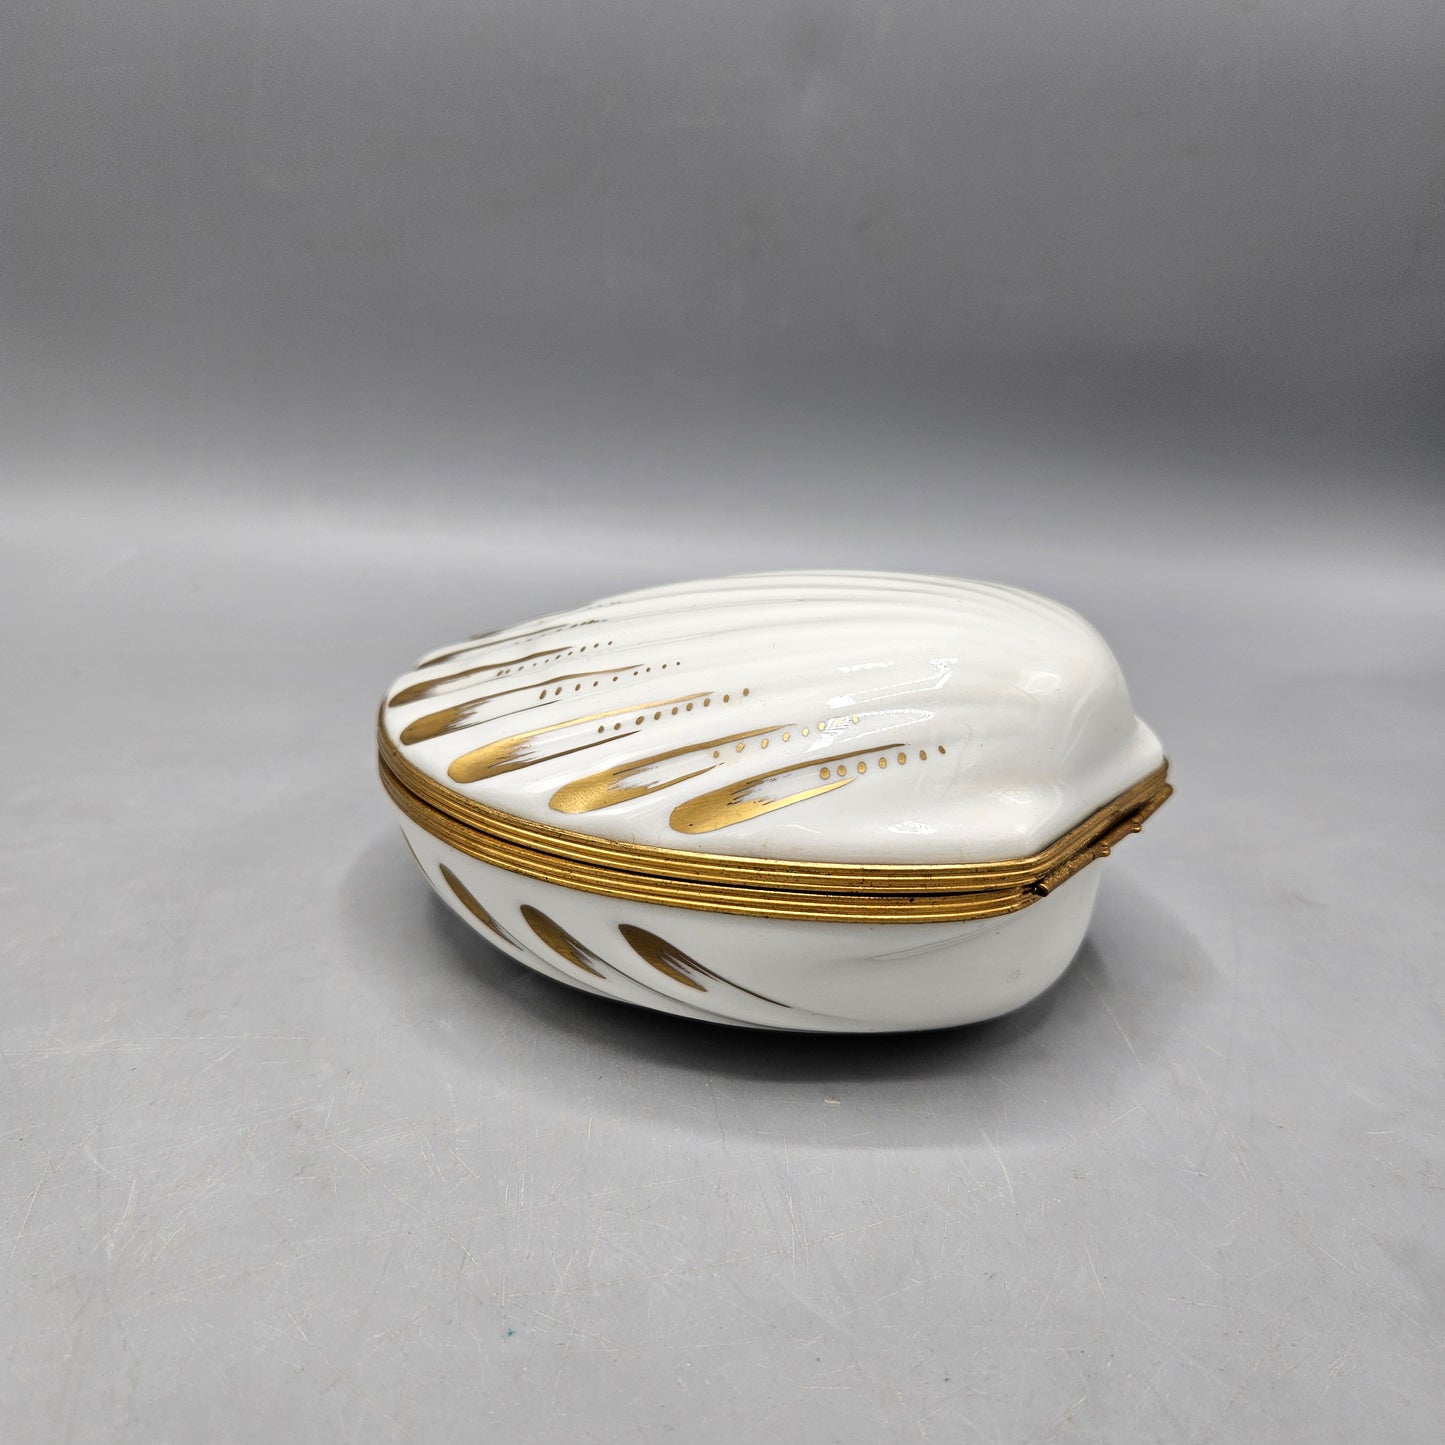 Vintage Limoges for Lord & Taylor Hinged Porcelain Clam Shell Trinket Box